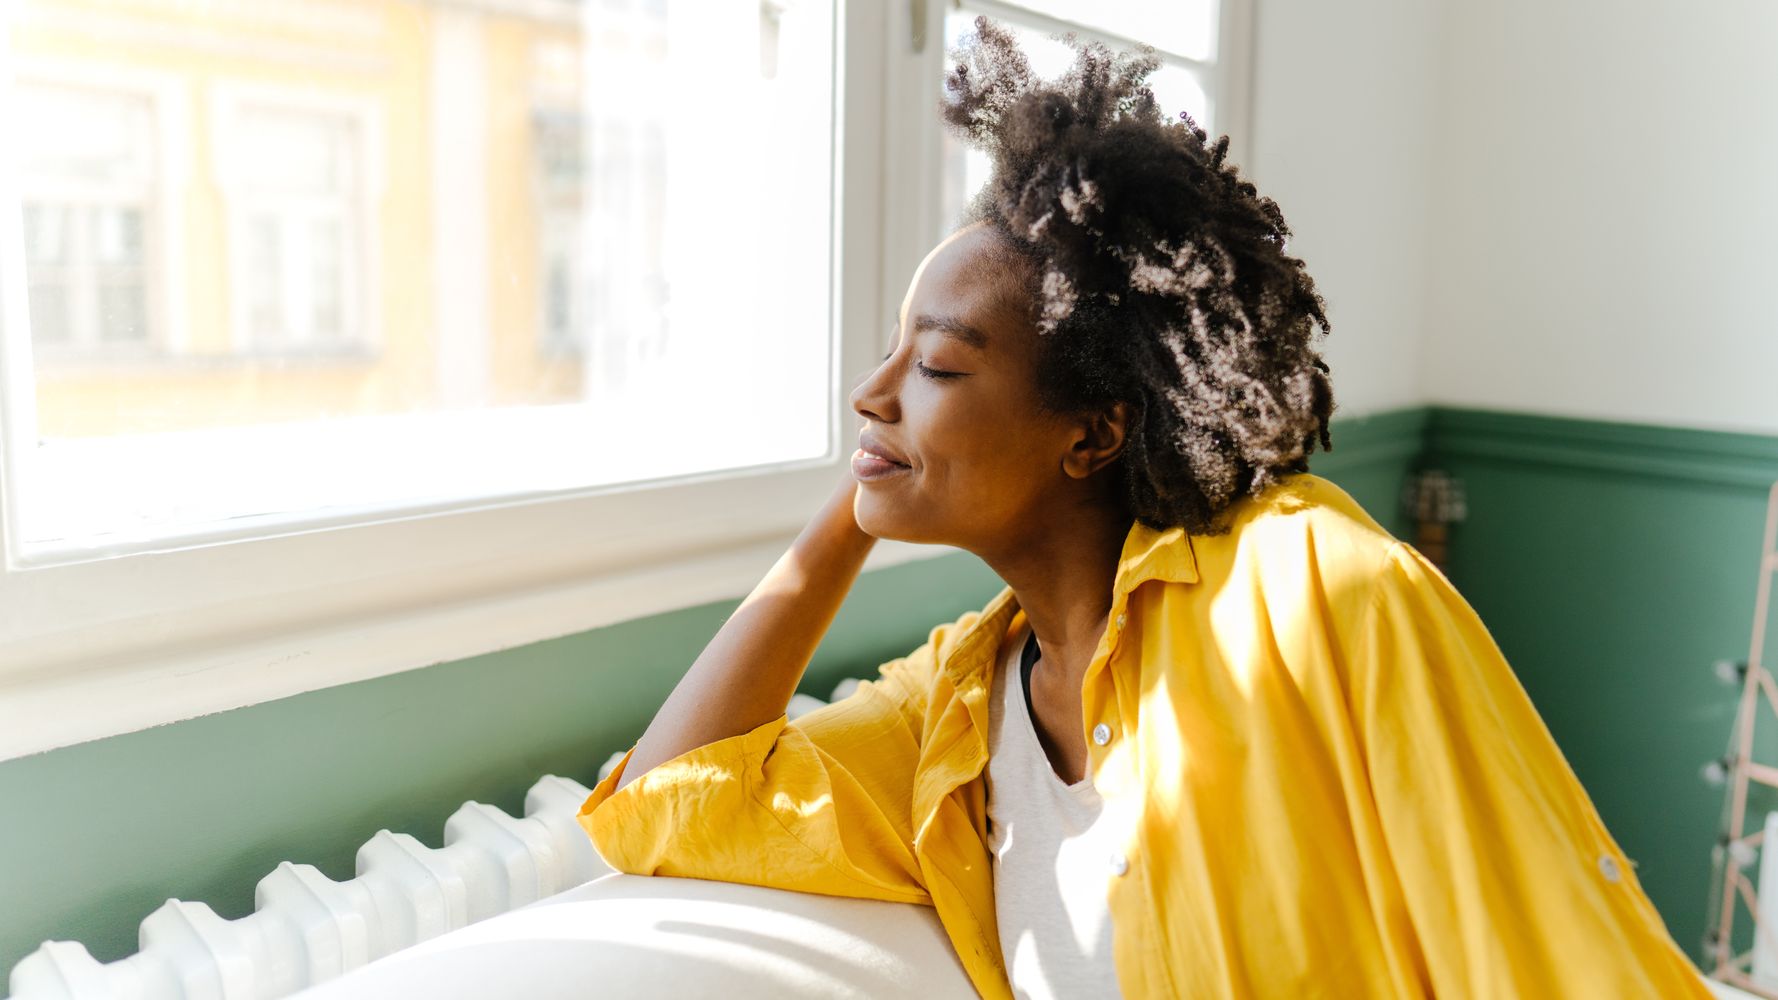 8 Effortless Self-Care Activities That Take Only 5 Minutes To Do